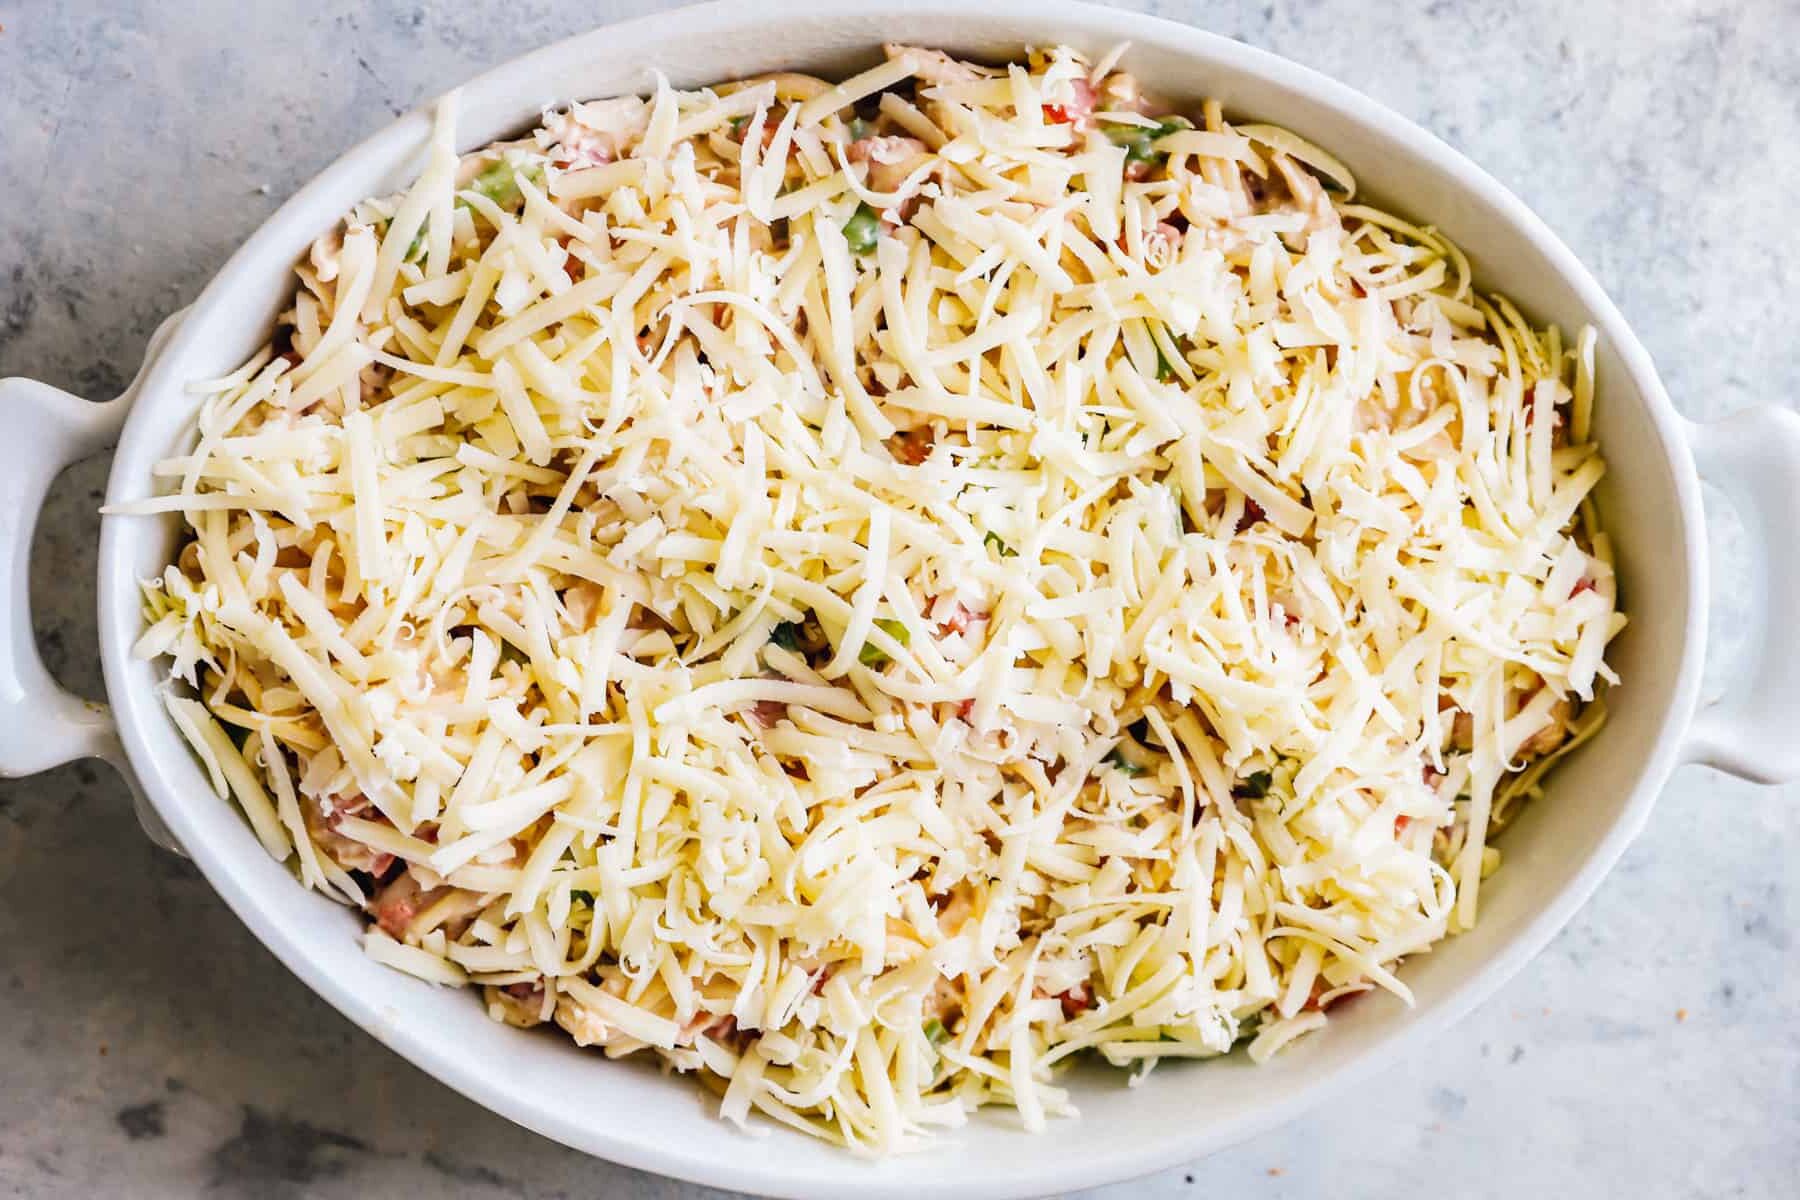 chicken spaghetti casserole before baking, topped with unmelted cheese